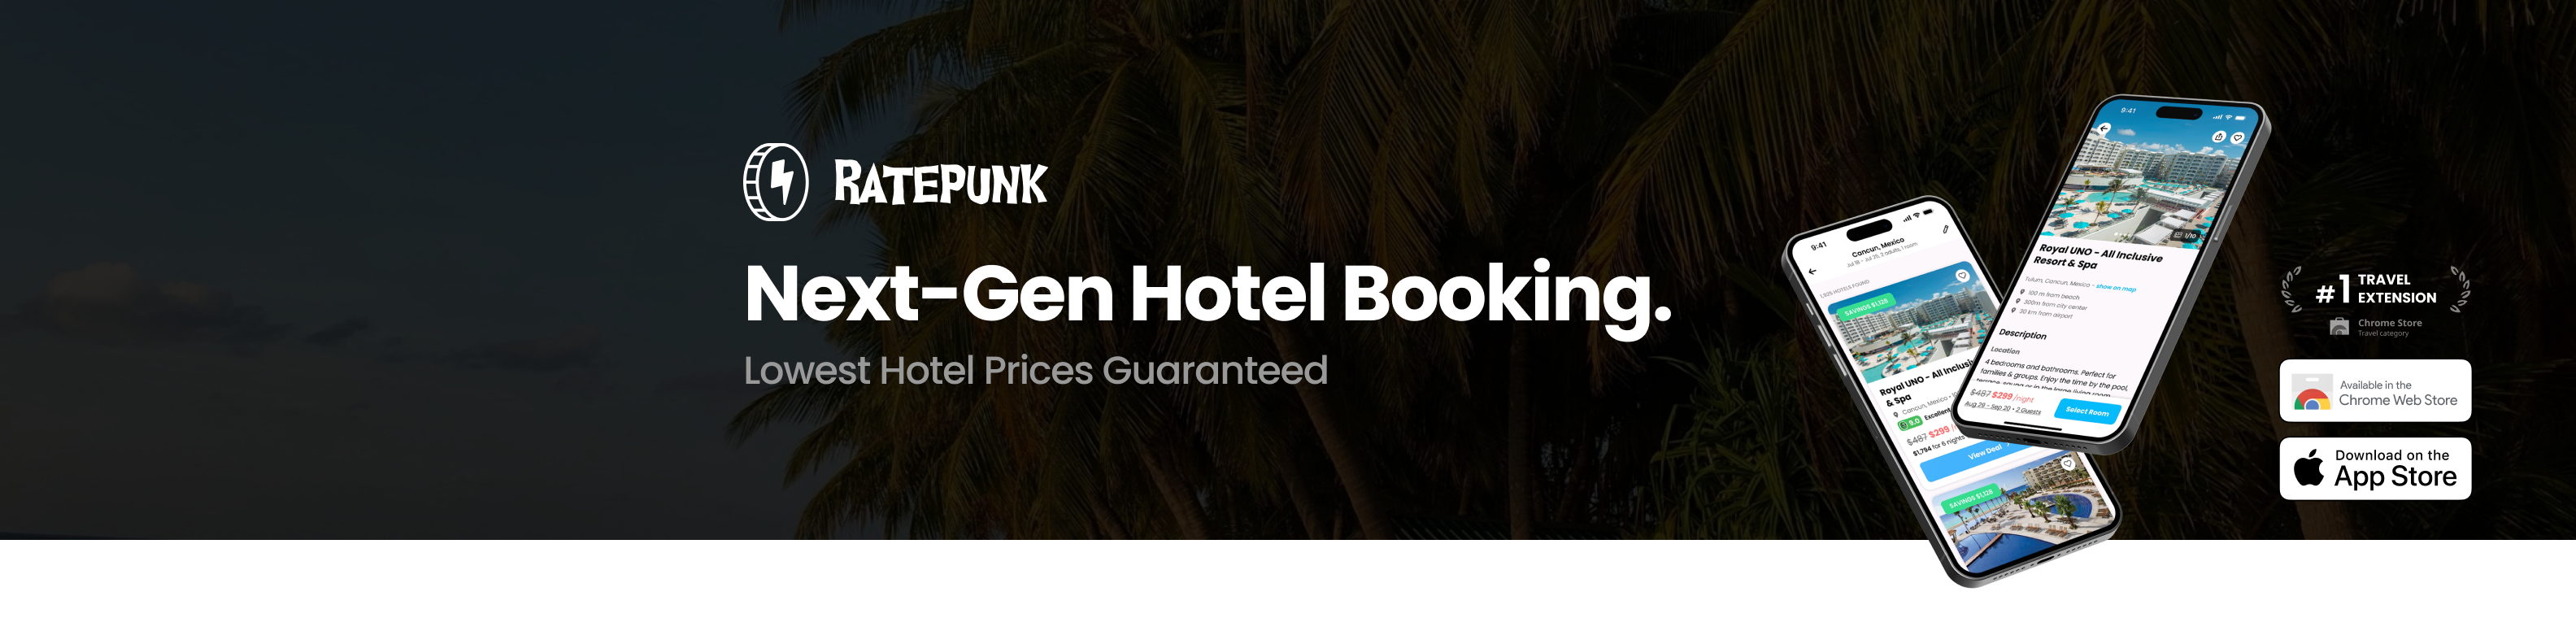 NExt-Gen Hotel Booking platfrom- RatePunk browser extension -hotel price comparison or RatePunk Mobile App